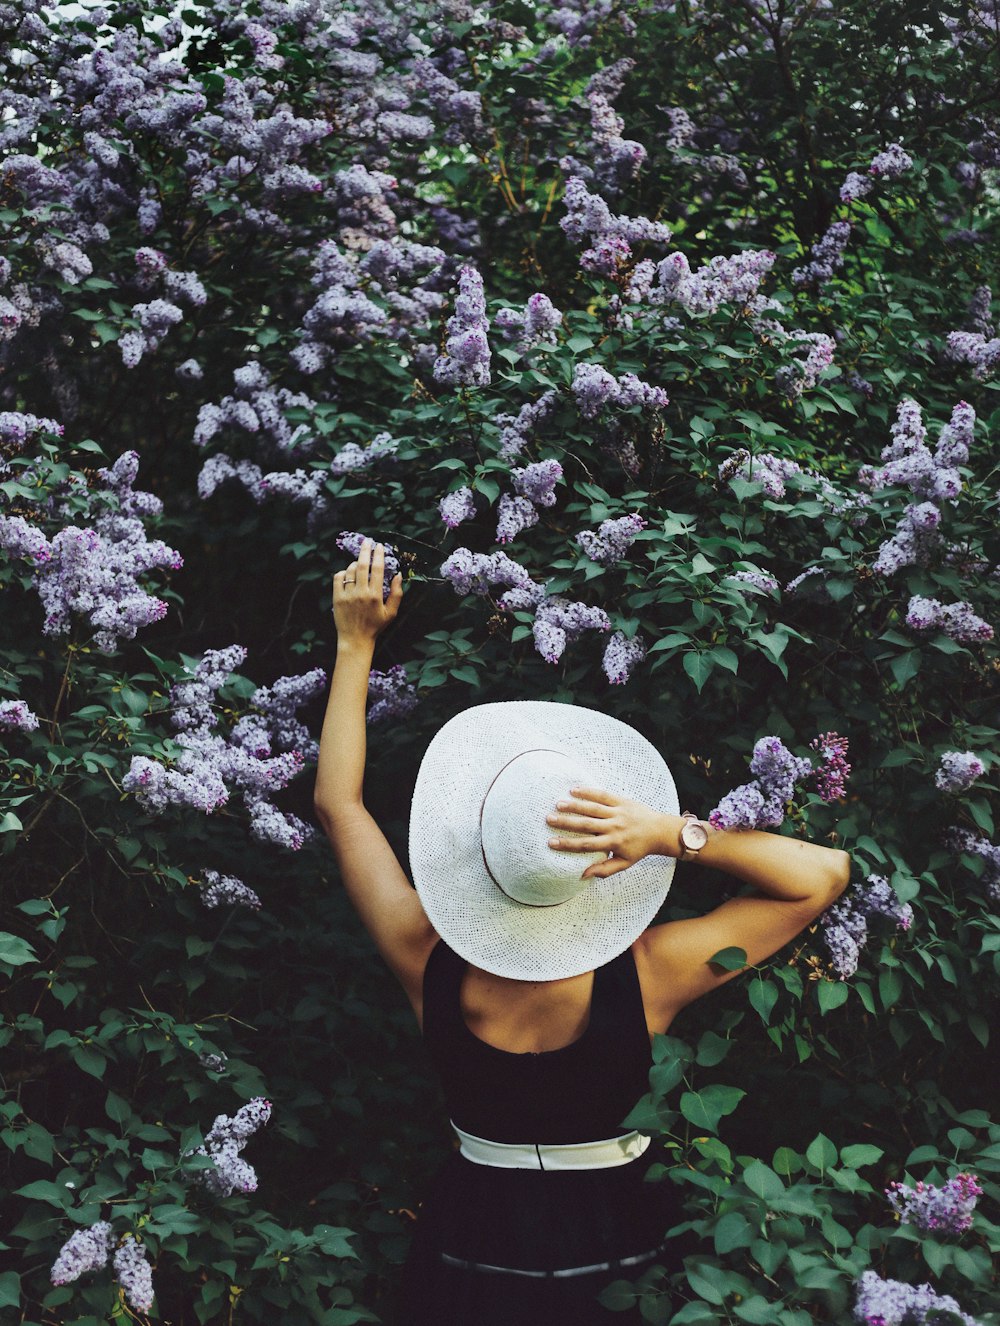 woman wearing black sleeveless top and holding hat and surrounded purple flowers